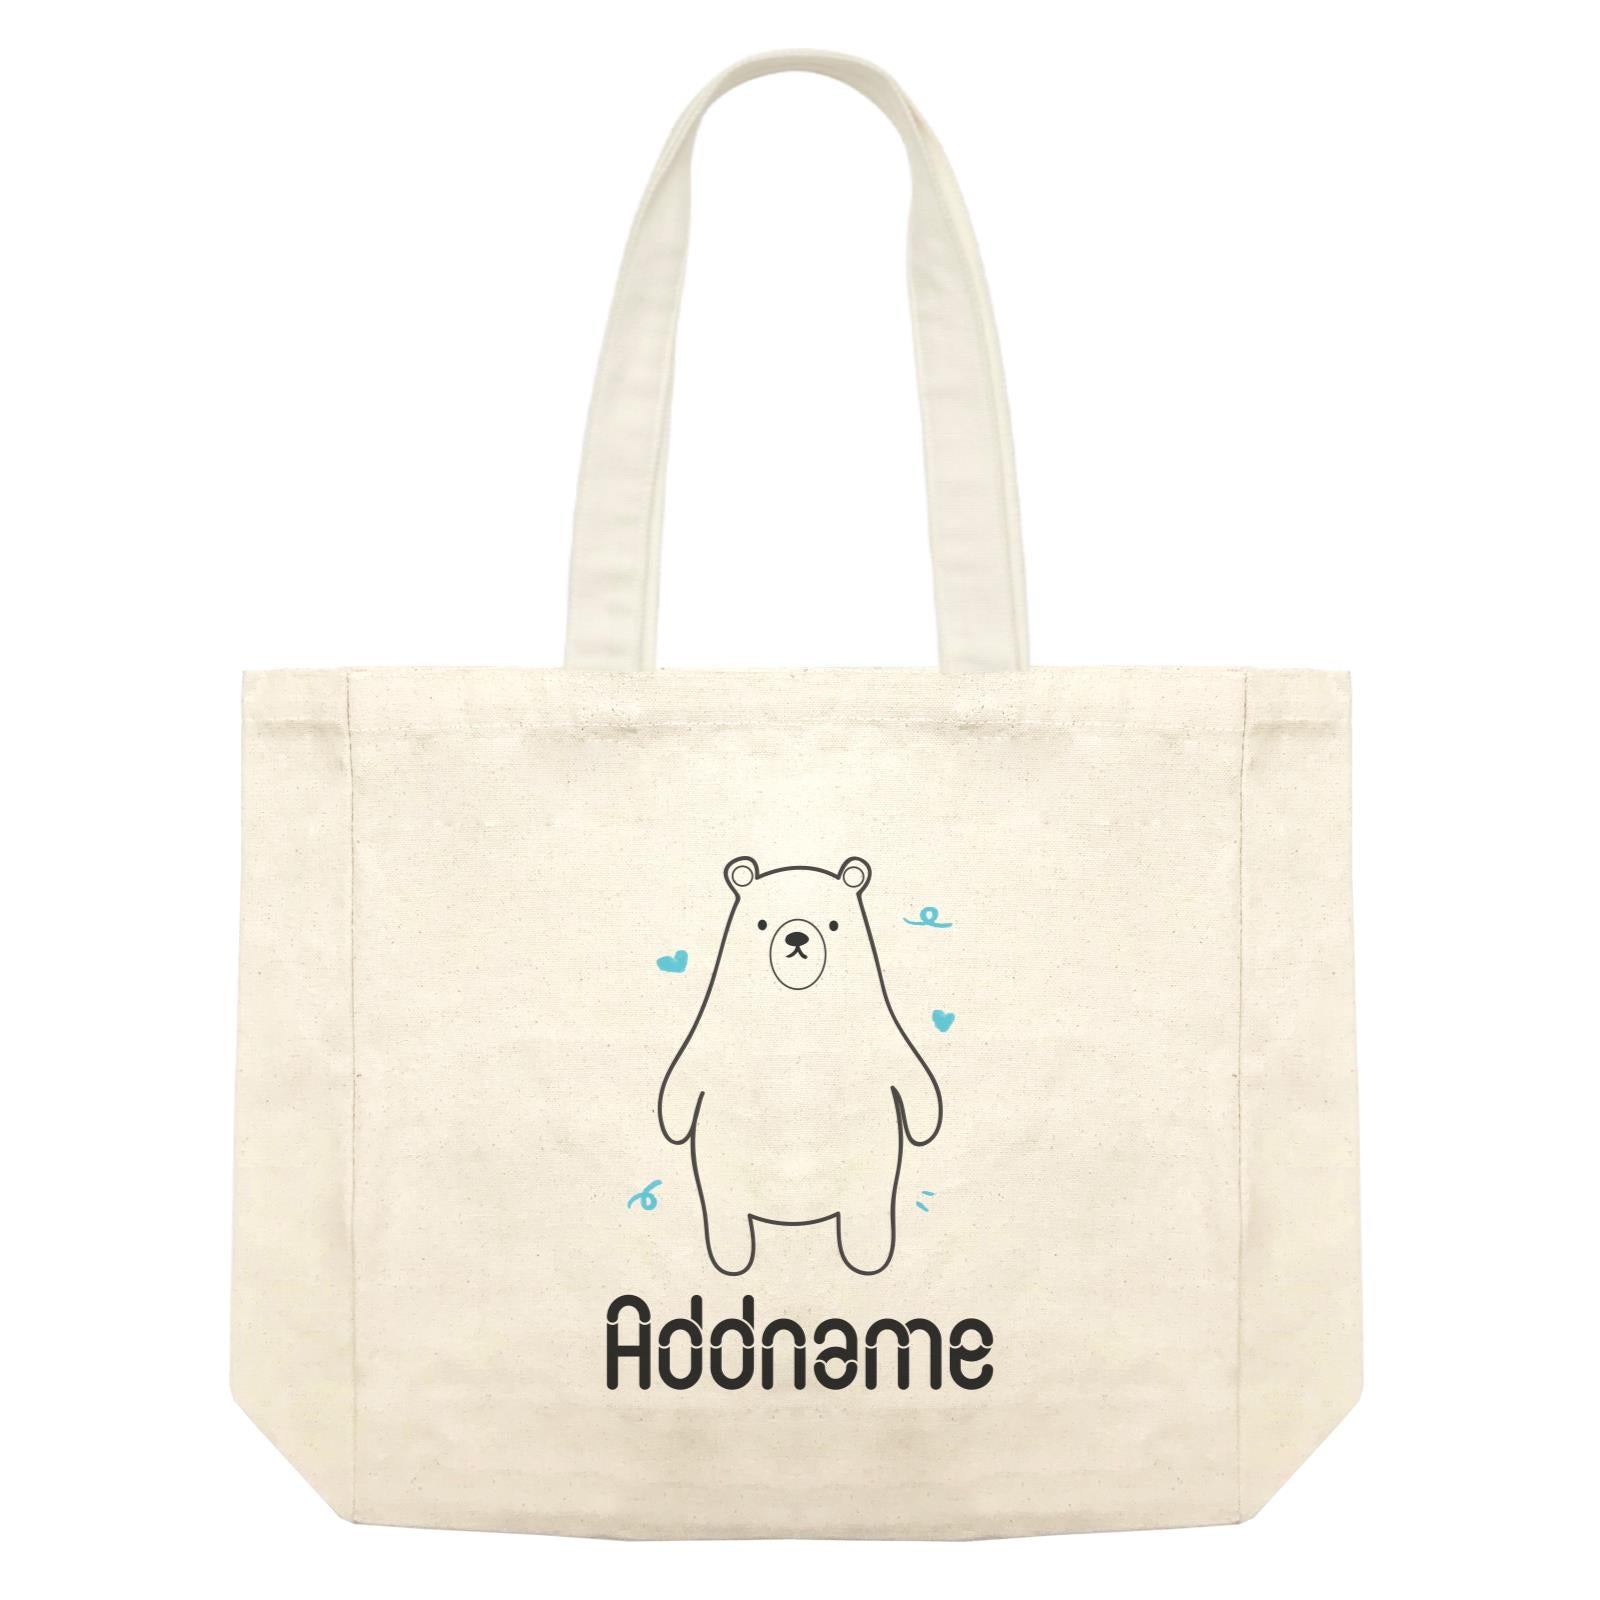 Coloring Outline Cute Hand Drawn Animals Cute Bear Addname Shopping Bag